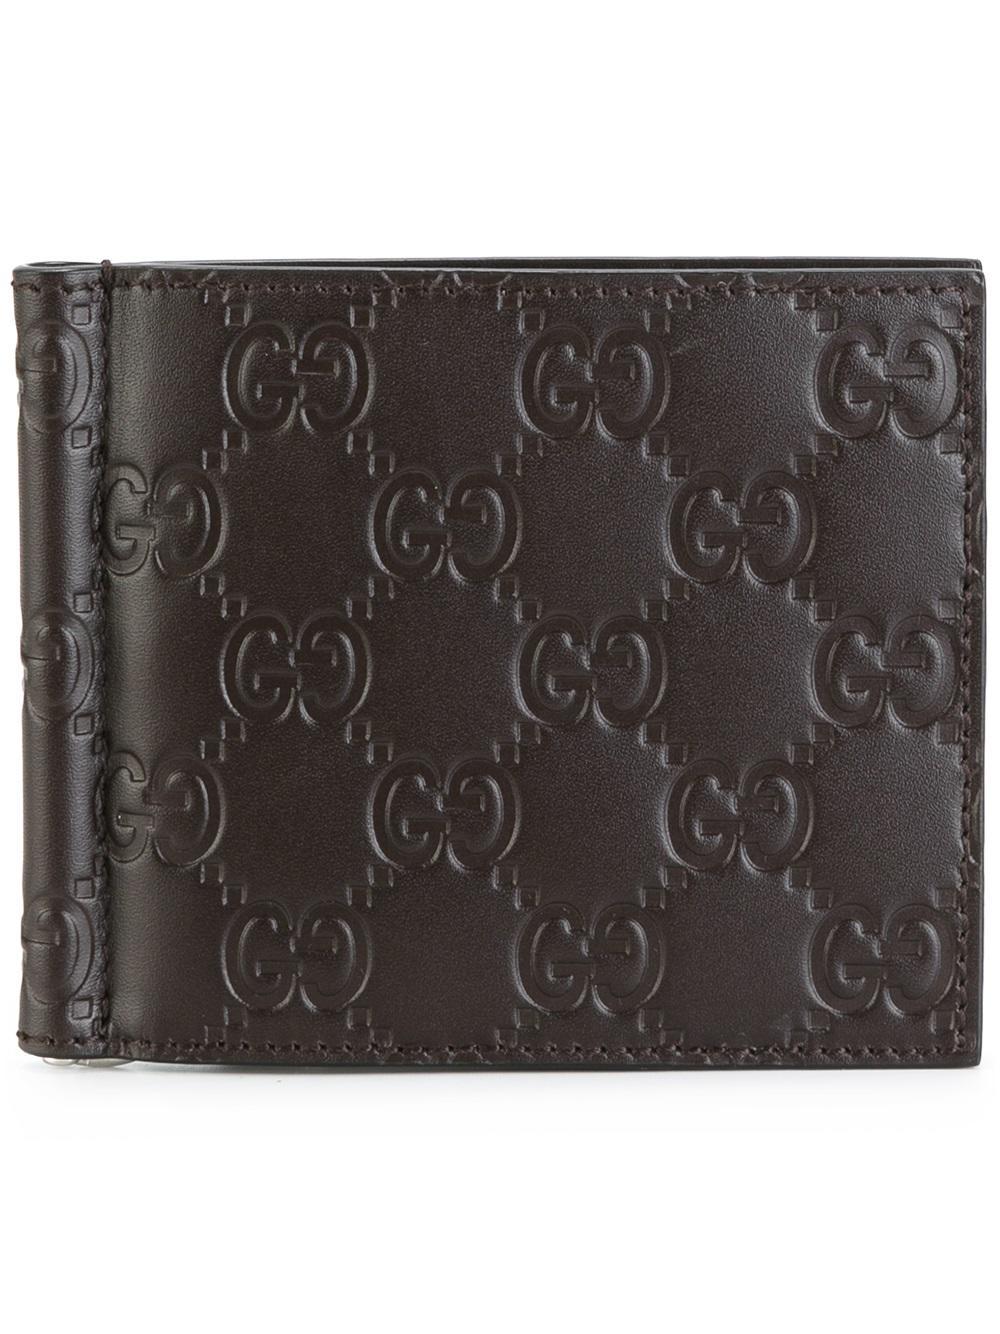 Gucci Signature Money Clip Wallet in Brown for Men - Lyst